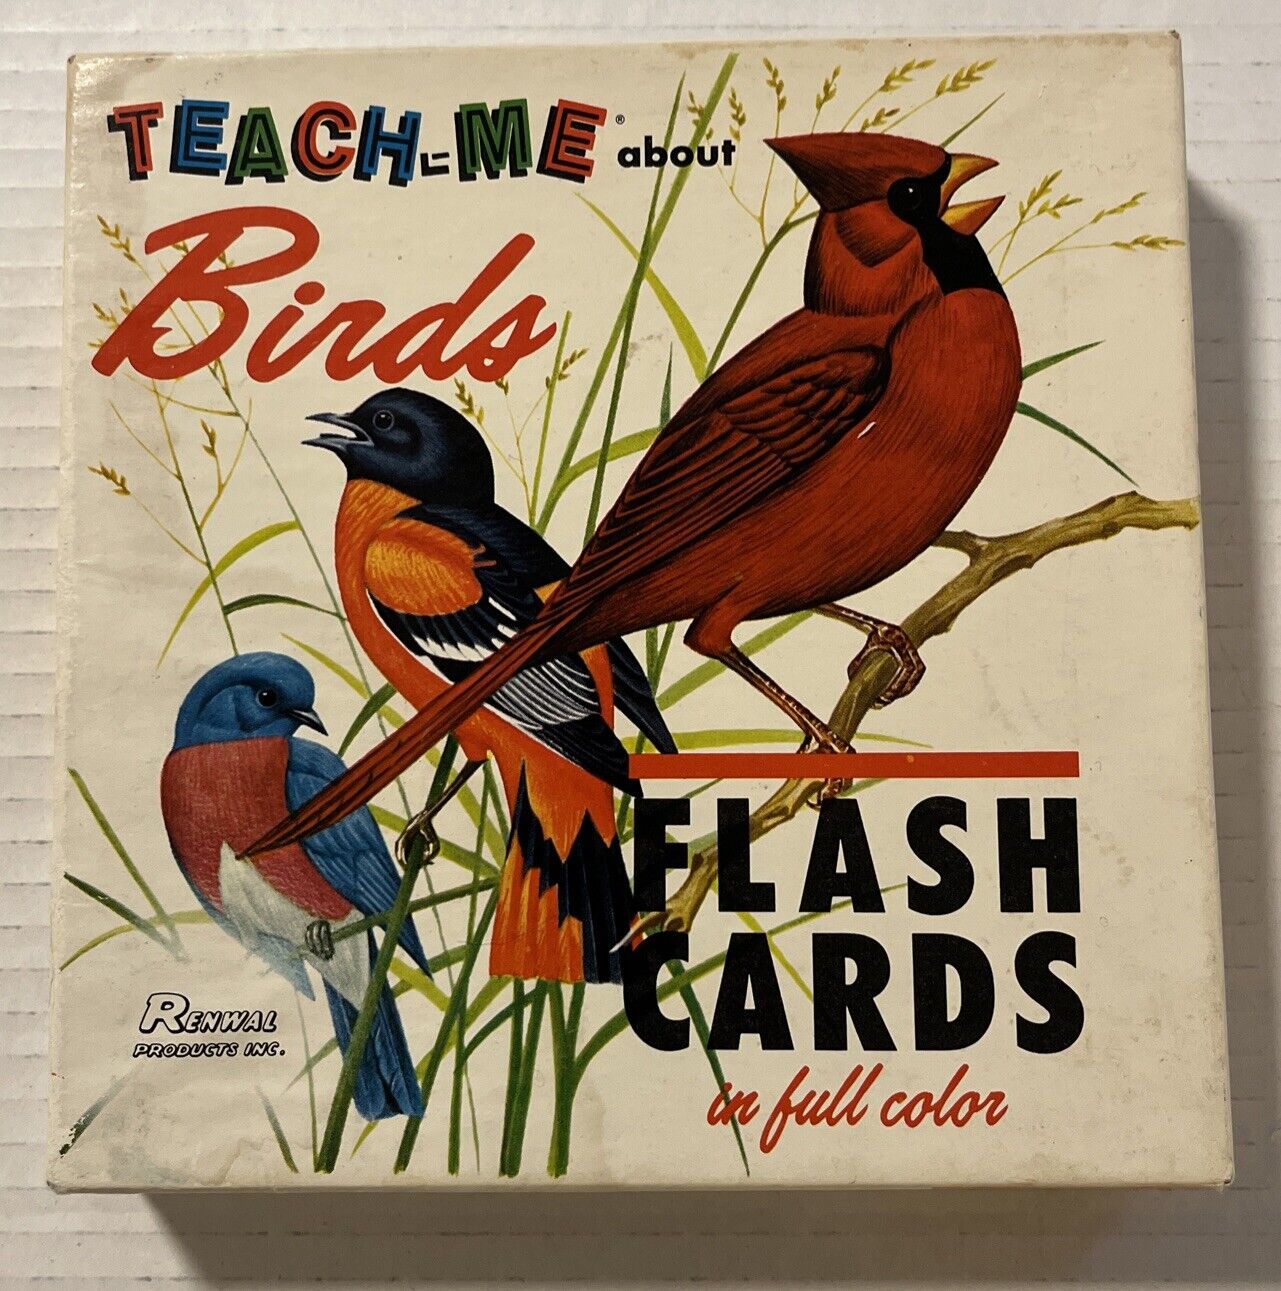 Teach-Me-about Birds Flash Cards In Full Color- Renwal-1968-Vintage-USA-VG Cond.